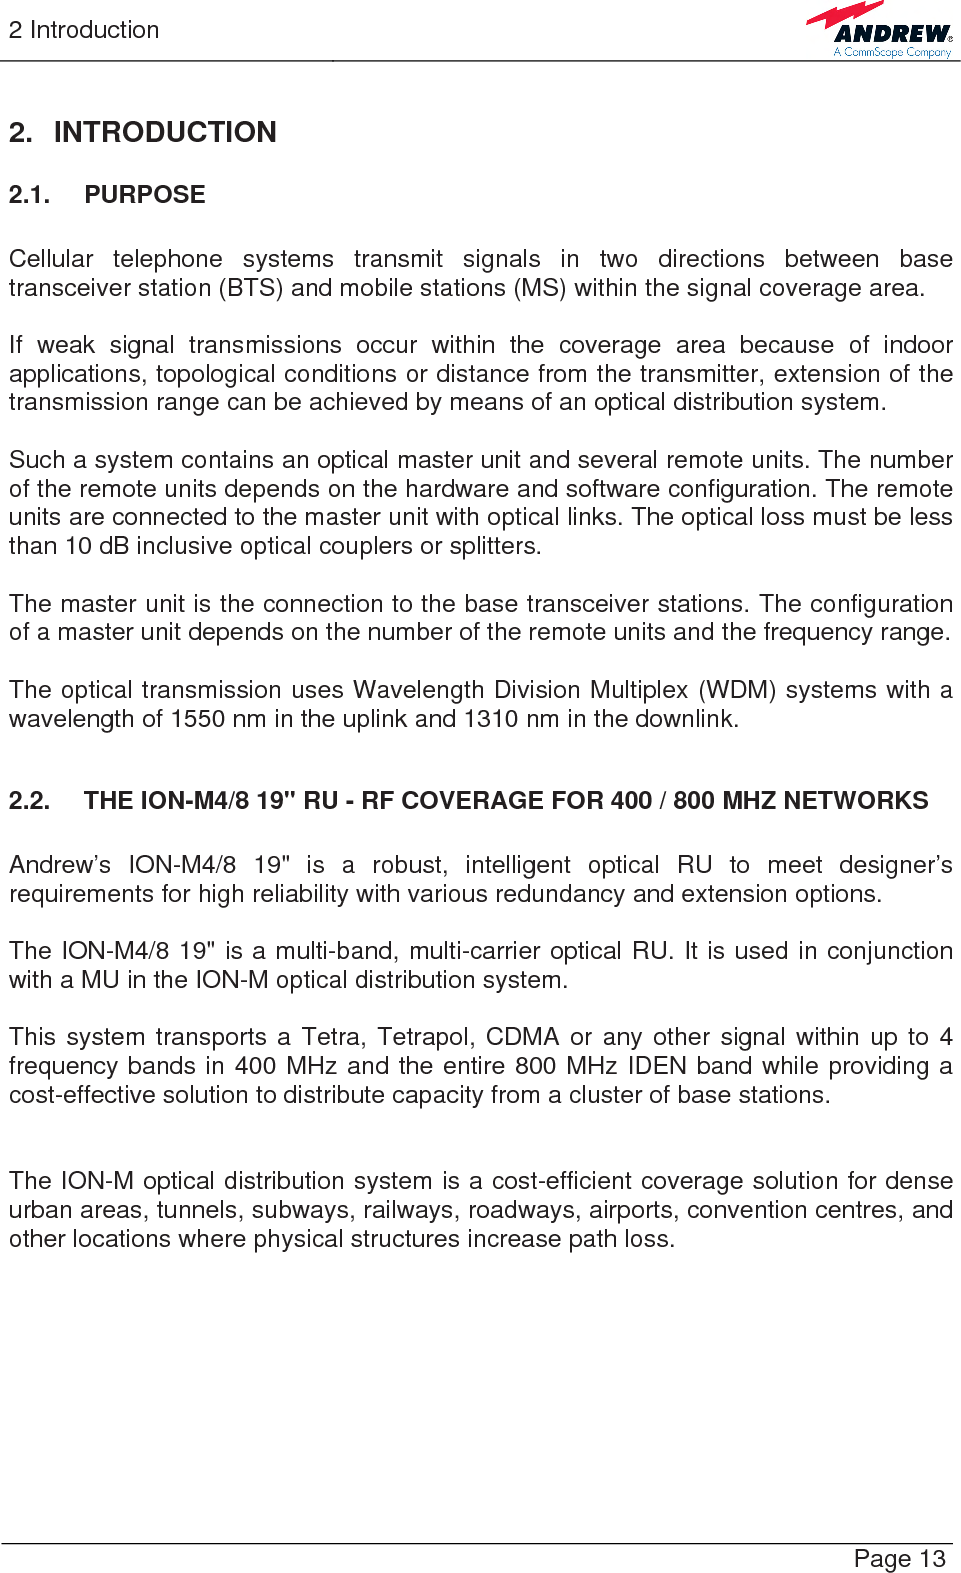 2 Introduction   Page 13 2. INTRODUCTION 2.1. PURPOSE  Cellular telephone systems transmit signals in two directions between base transceiver station (BTS) and mobile stations (MS) within the signal coverage area.  If weak signal transmissions occur within the coverage area because of indoor applications, topological conditions or distance from the transmitter, extension of the transmission range can be achieved by means of an optical distribution system.  Such a system contains an optical master unit and several remote units. The number of the remote units depends on the hardware and software configuration. The remote units are connected to the master unit with optical links. The optical loss must be less than 10 dB inclusive optical couplers or splitters.  The master unit is the connection to the base transceiver stations. The configuration of a master unit depends on the number of the remote units and the frequency range.   The optical transmission uses Wavelength Division Multiplex (WDM) systems with a wavelength of 1550 nm in the uplink and 1310 nm in the downlink.  2.2.  THE ION-M4/8 19&quot; RU - RF COVERAGE FOR 400 / 800 MHZ NETWORKS  Andrew’s ION-M4/8 19&quot; is a robust, intelligent optical RU to meet designer’s requirements for high reliability with various redundancy and extension options.  The ION-M4/8 19&quot; is a multi-band, multi-carrier optical RU. It is used in conjunction with a MU in the ION-M optical distribution system.  This system transports a Tetra, Tetrapol, CDMA or any other signal within up to 4 frequency bands in 400 MHz and the entire 800 MHz IDEN band while providing a cost-effective solution to distribute capacity from a cluster of base stations.   The ION-M optical distribution system is a cost-efficient coverage solution for dense urban areas, tunnels, subways, railways, roadways, airports, convention centres, and other locations where physical structures increase path loss. 